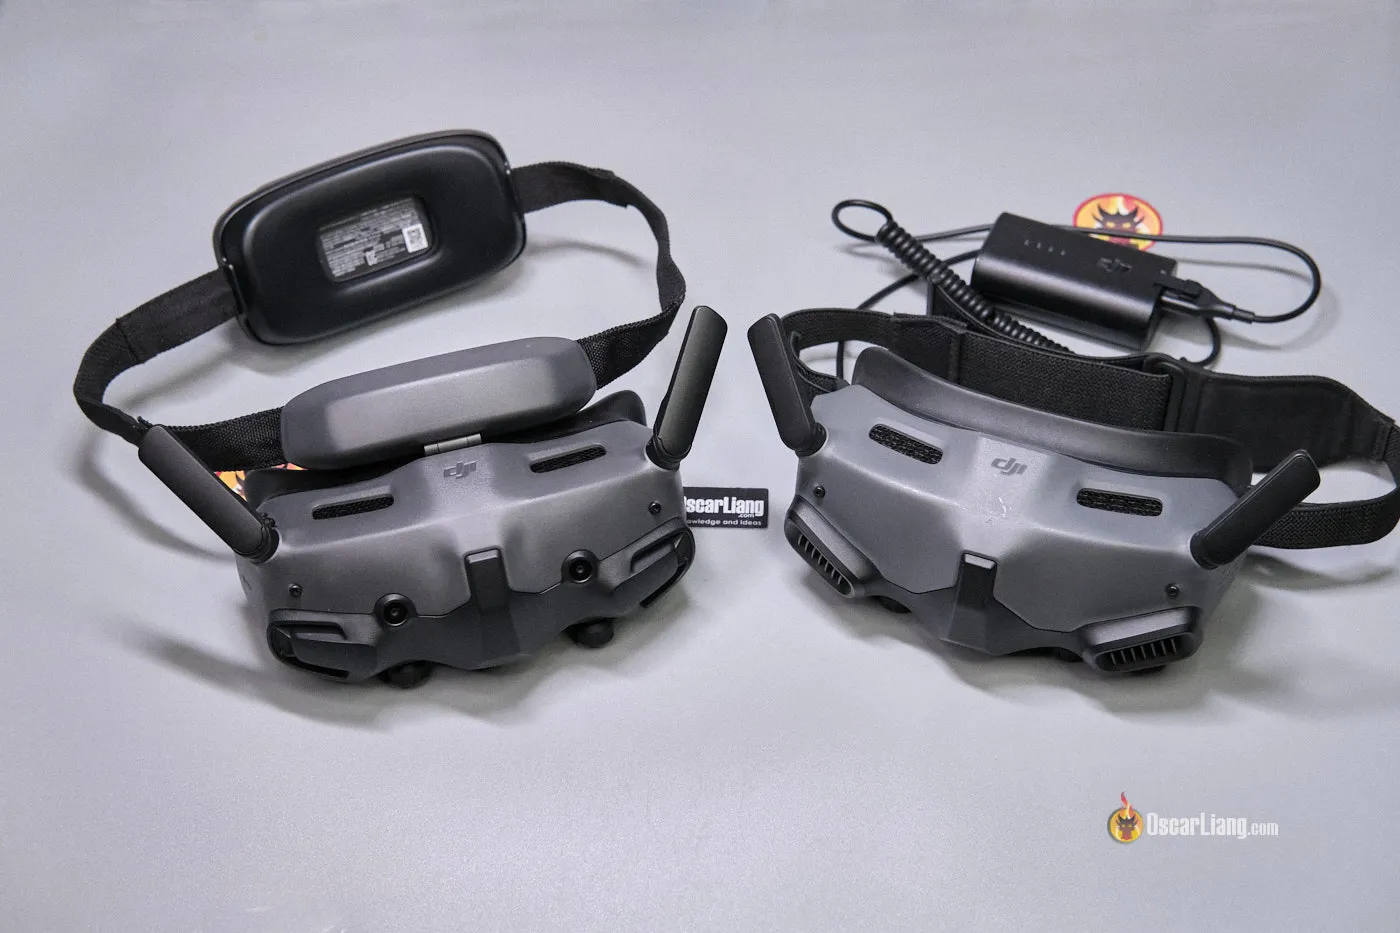 DJI Goggles 3 vs. Goggles 2: What Are the Differences? Which Should You Buy?